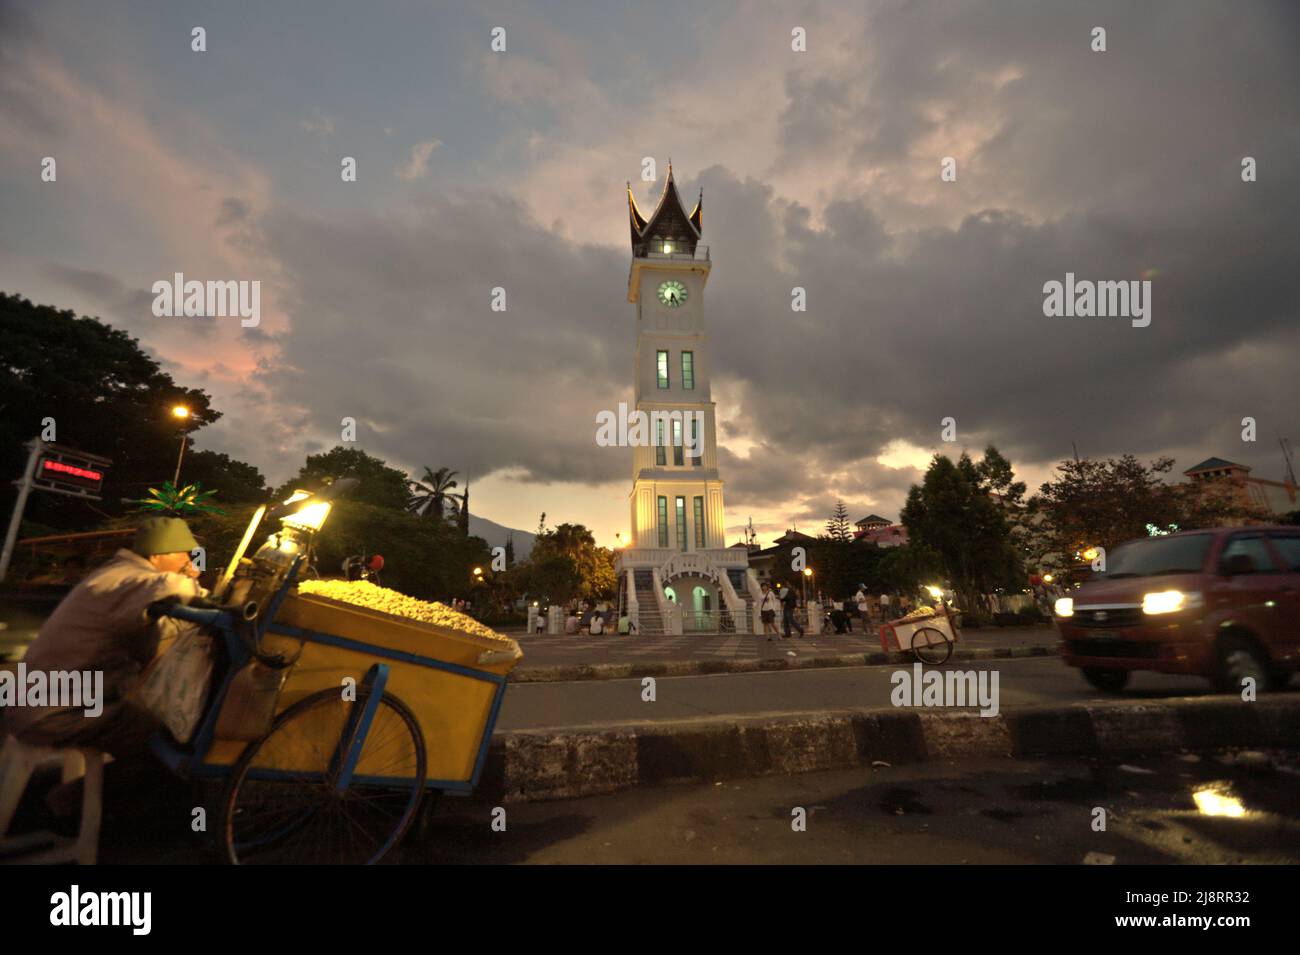 Steamed peanuts vendor and road traffic in a background of big clock tower known locally as Jam Gadang, a major landmark in Bukittinggi, West Sumatra, Indonesia. Stock Photo